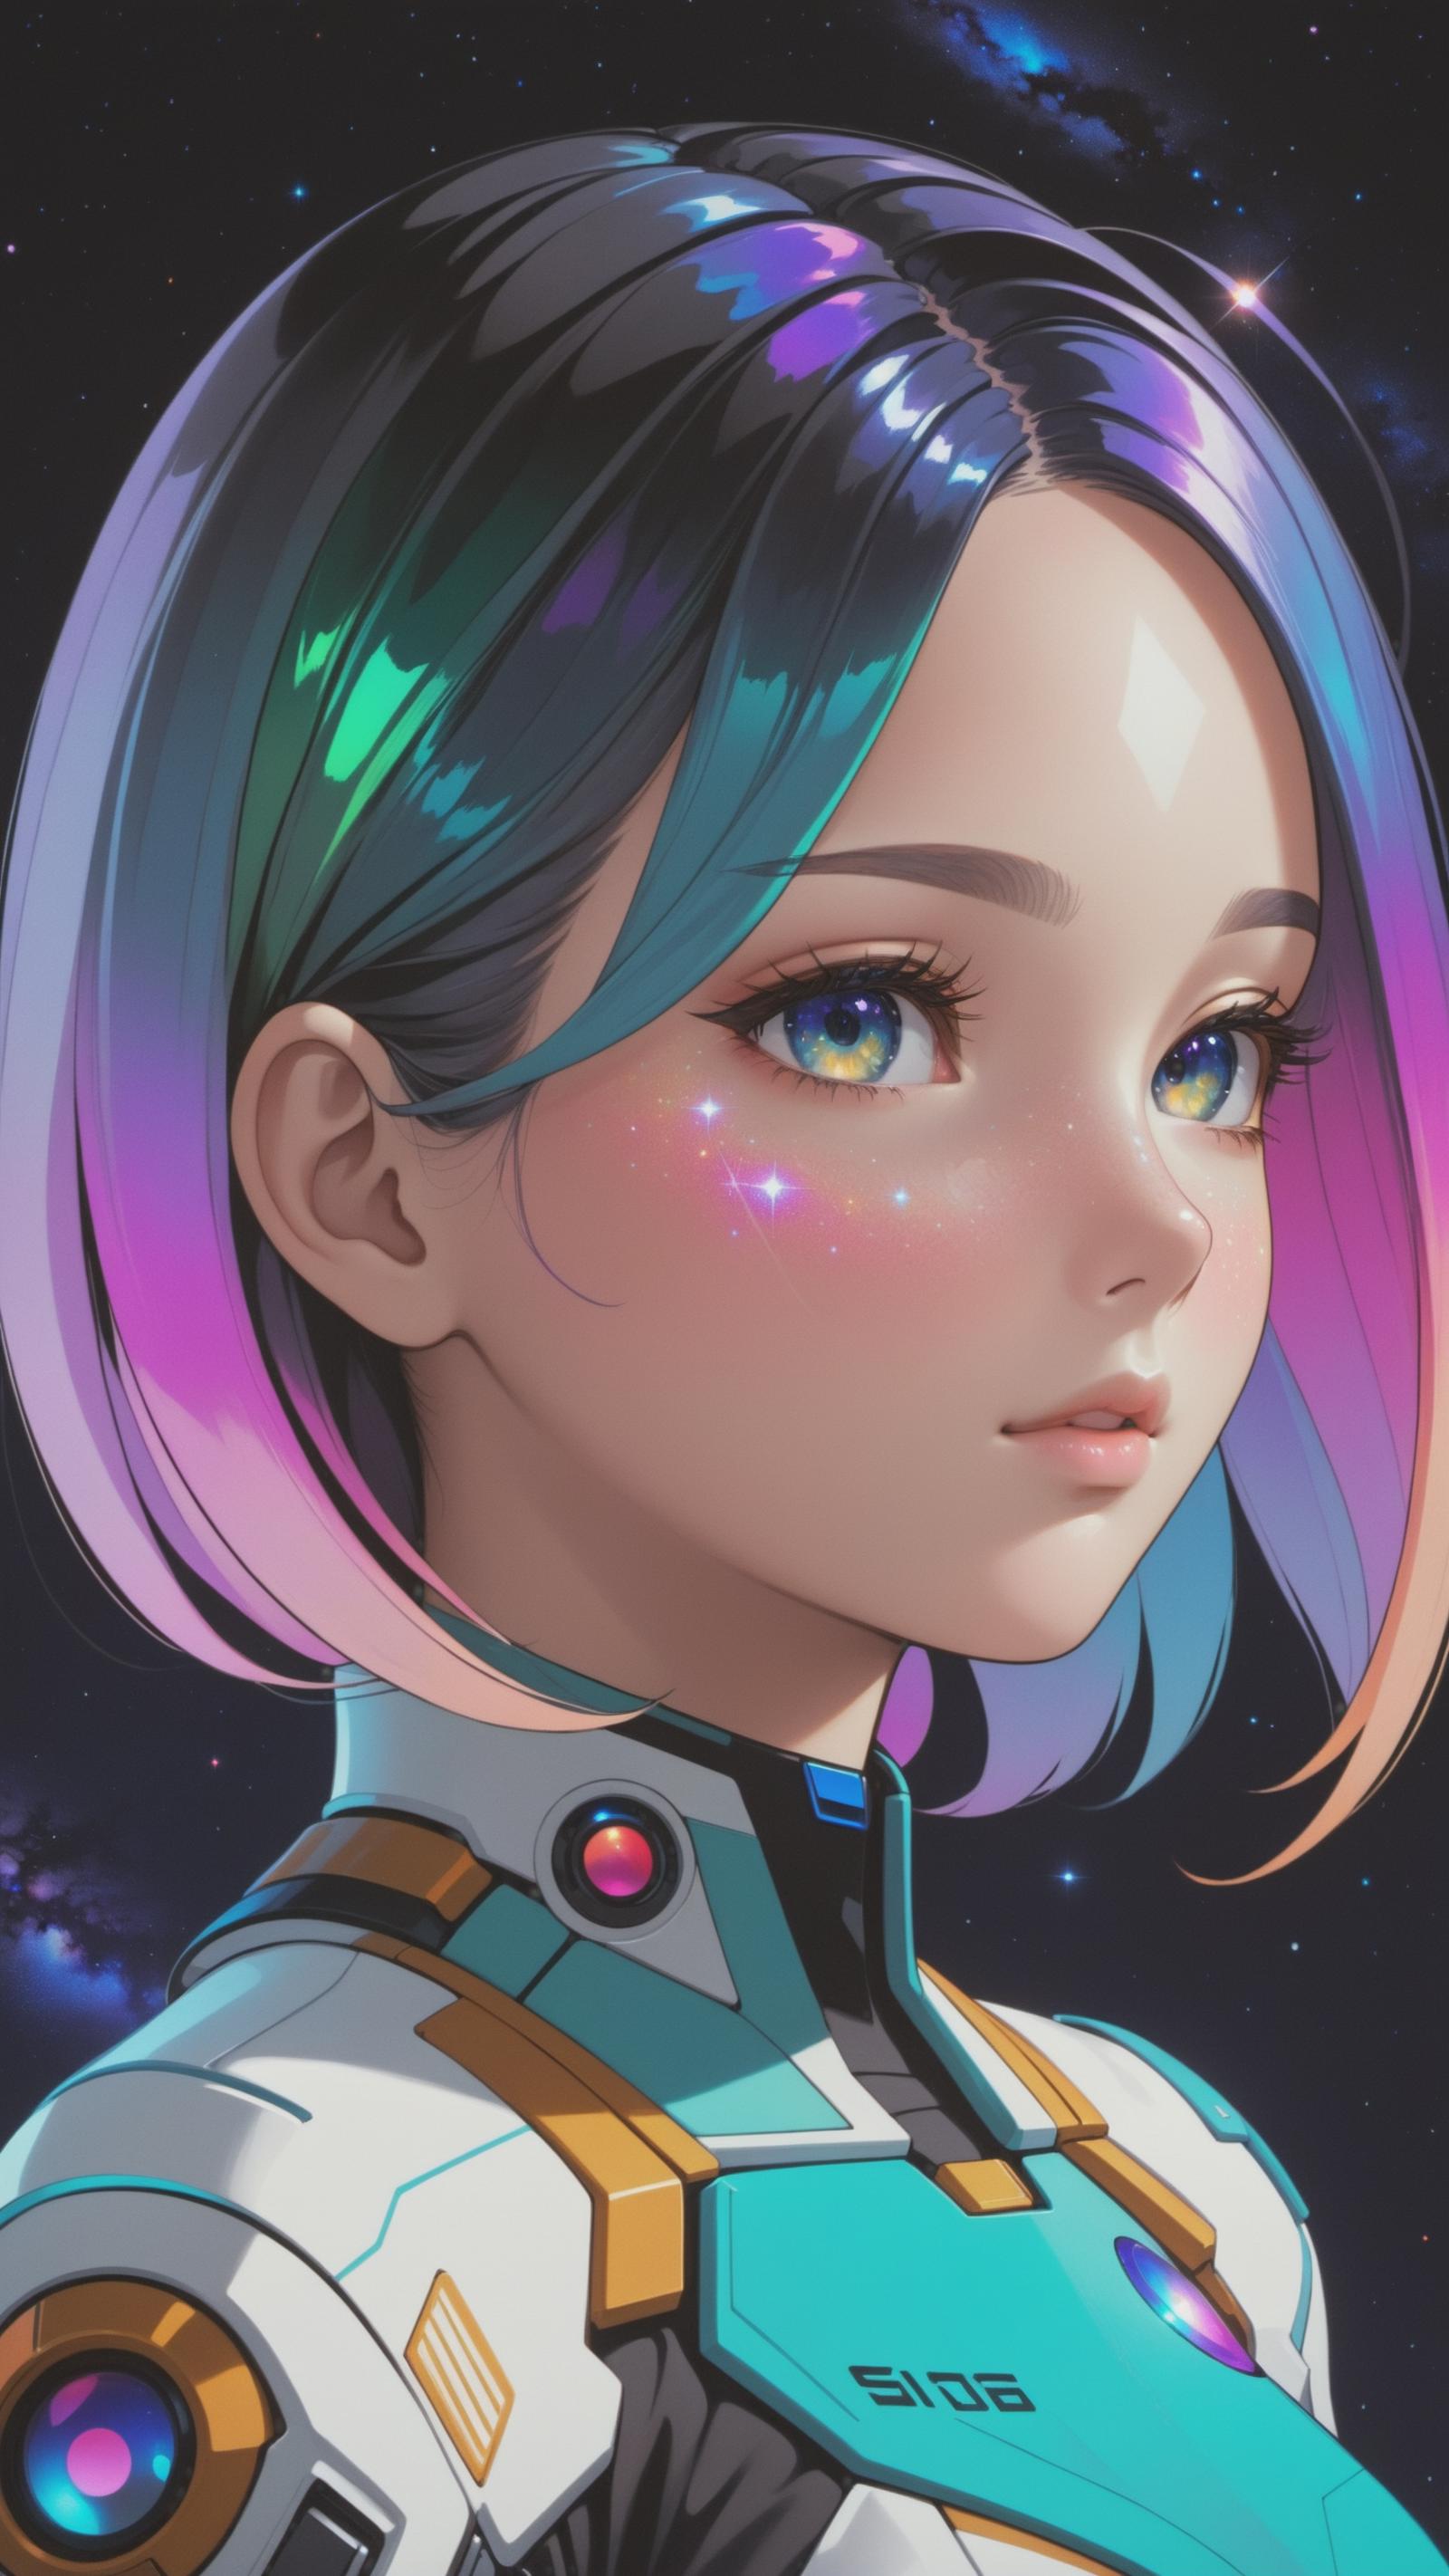 A colorful and detailed illustration of a woman with blue eyes and a pink star.